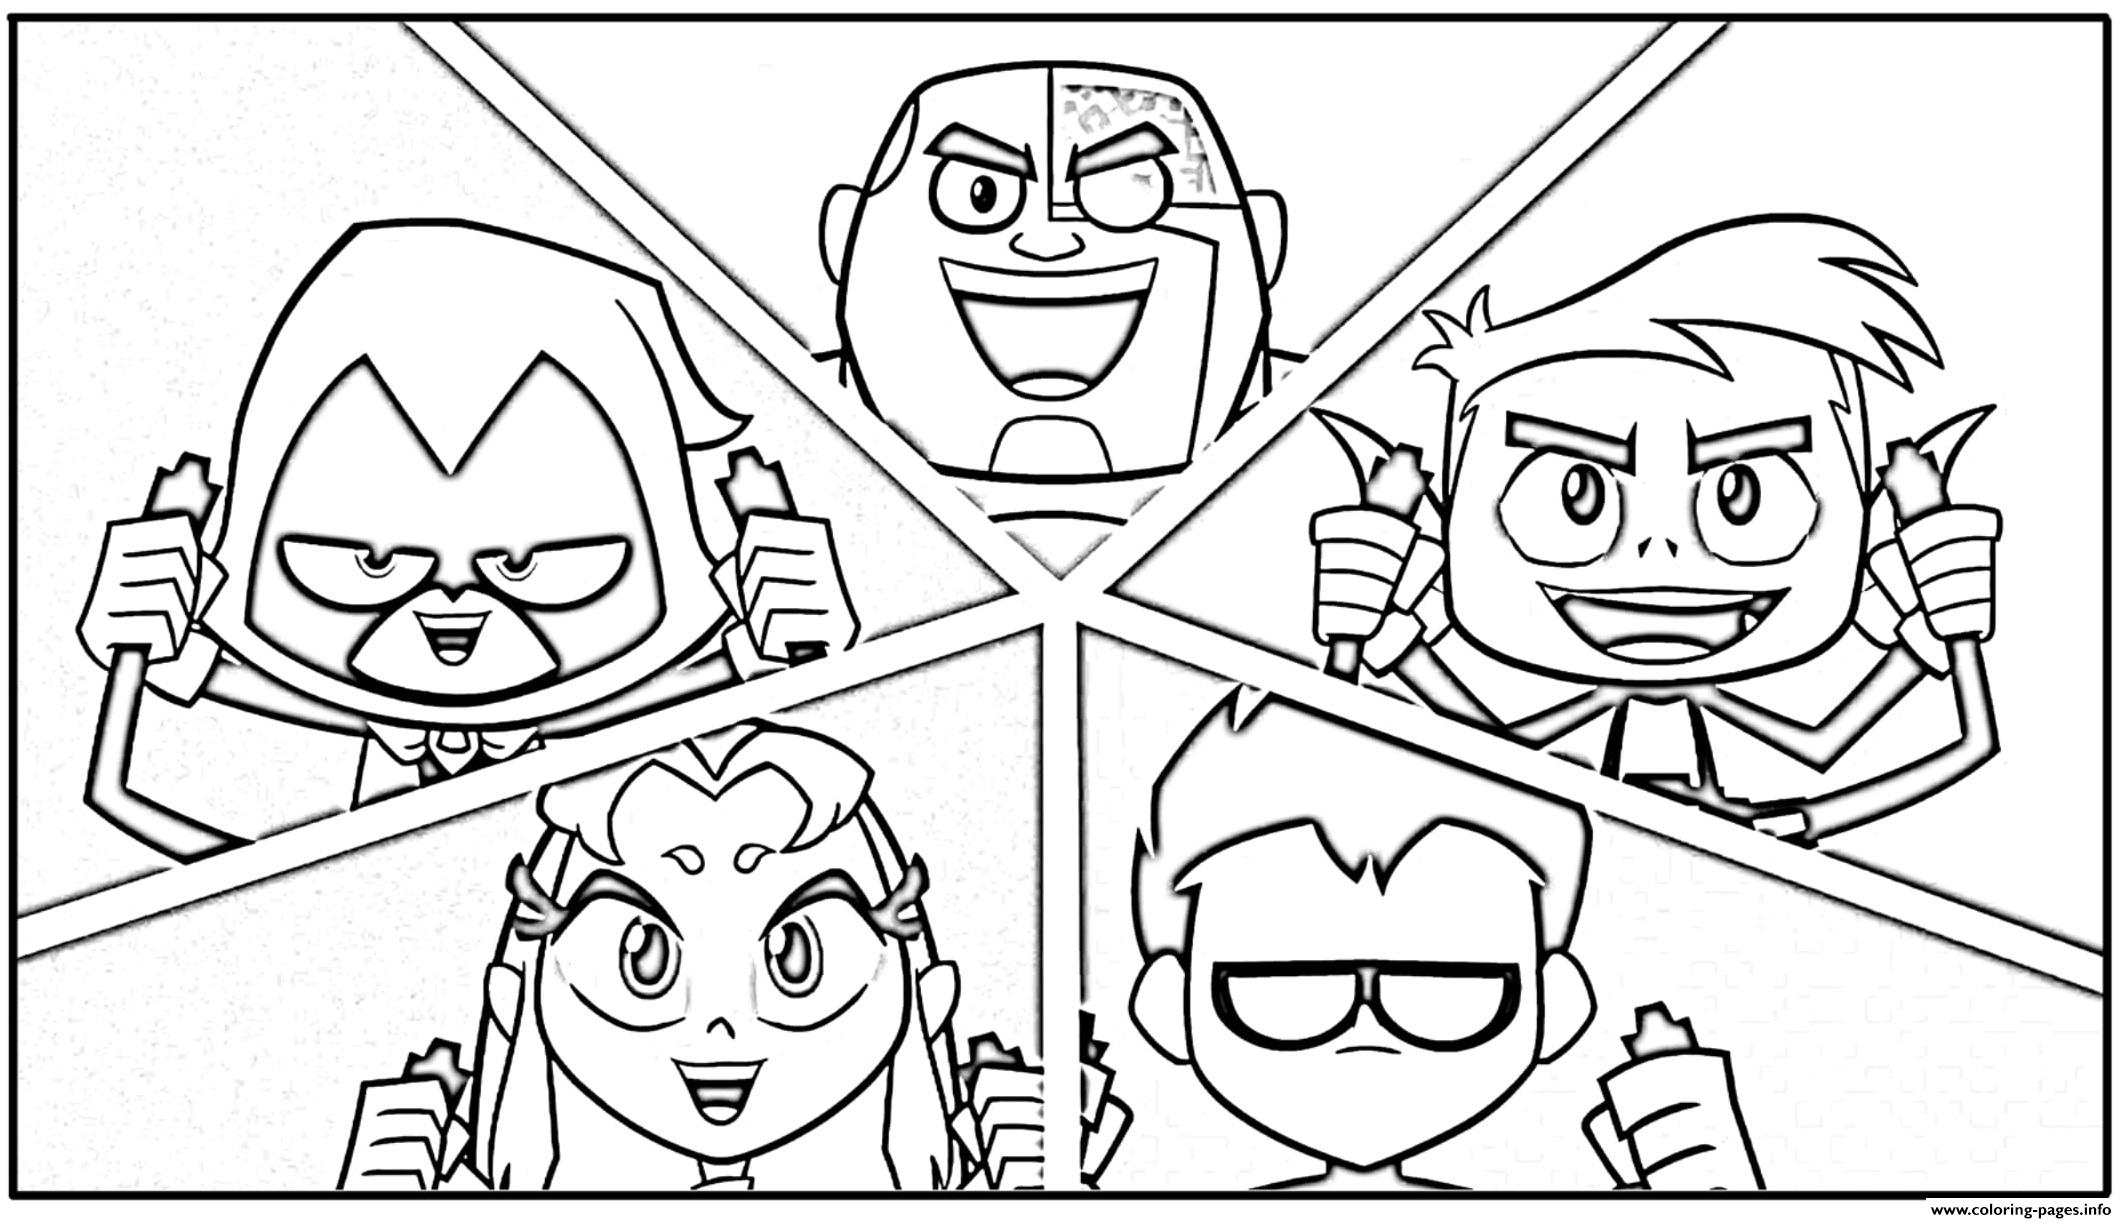 teen-titans-go-coloring-pages-all-characters-print-color-craft